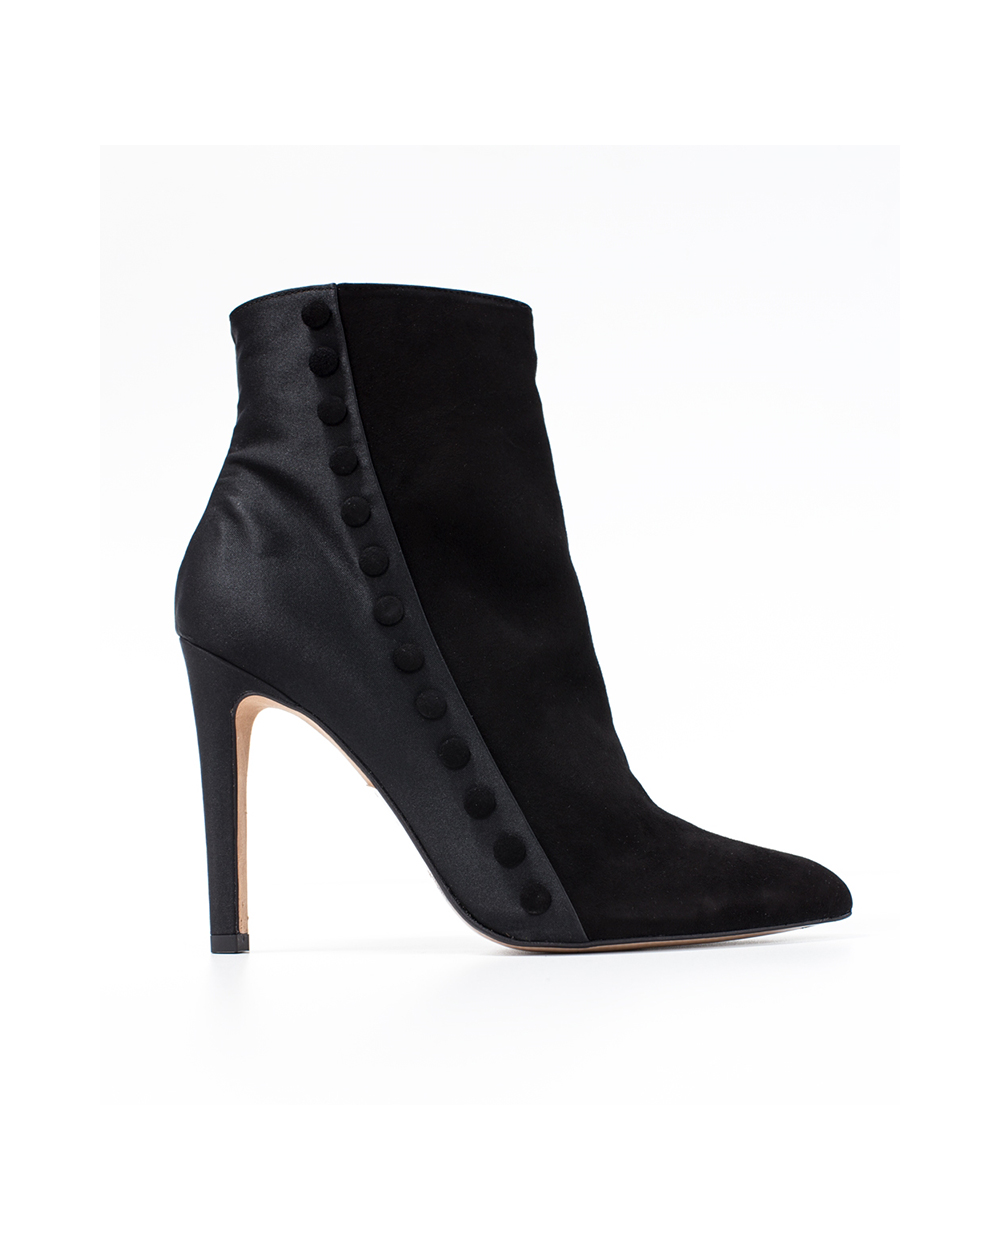 THE BLACK POINT: Pura Lopez boots, $690 from Runway